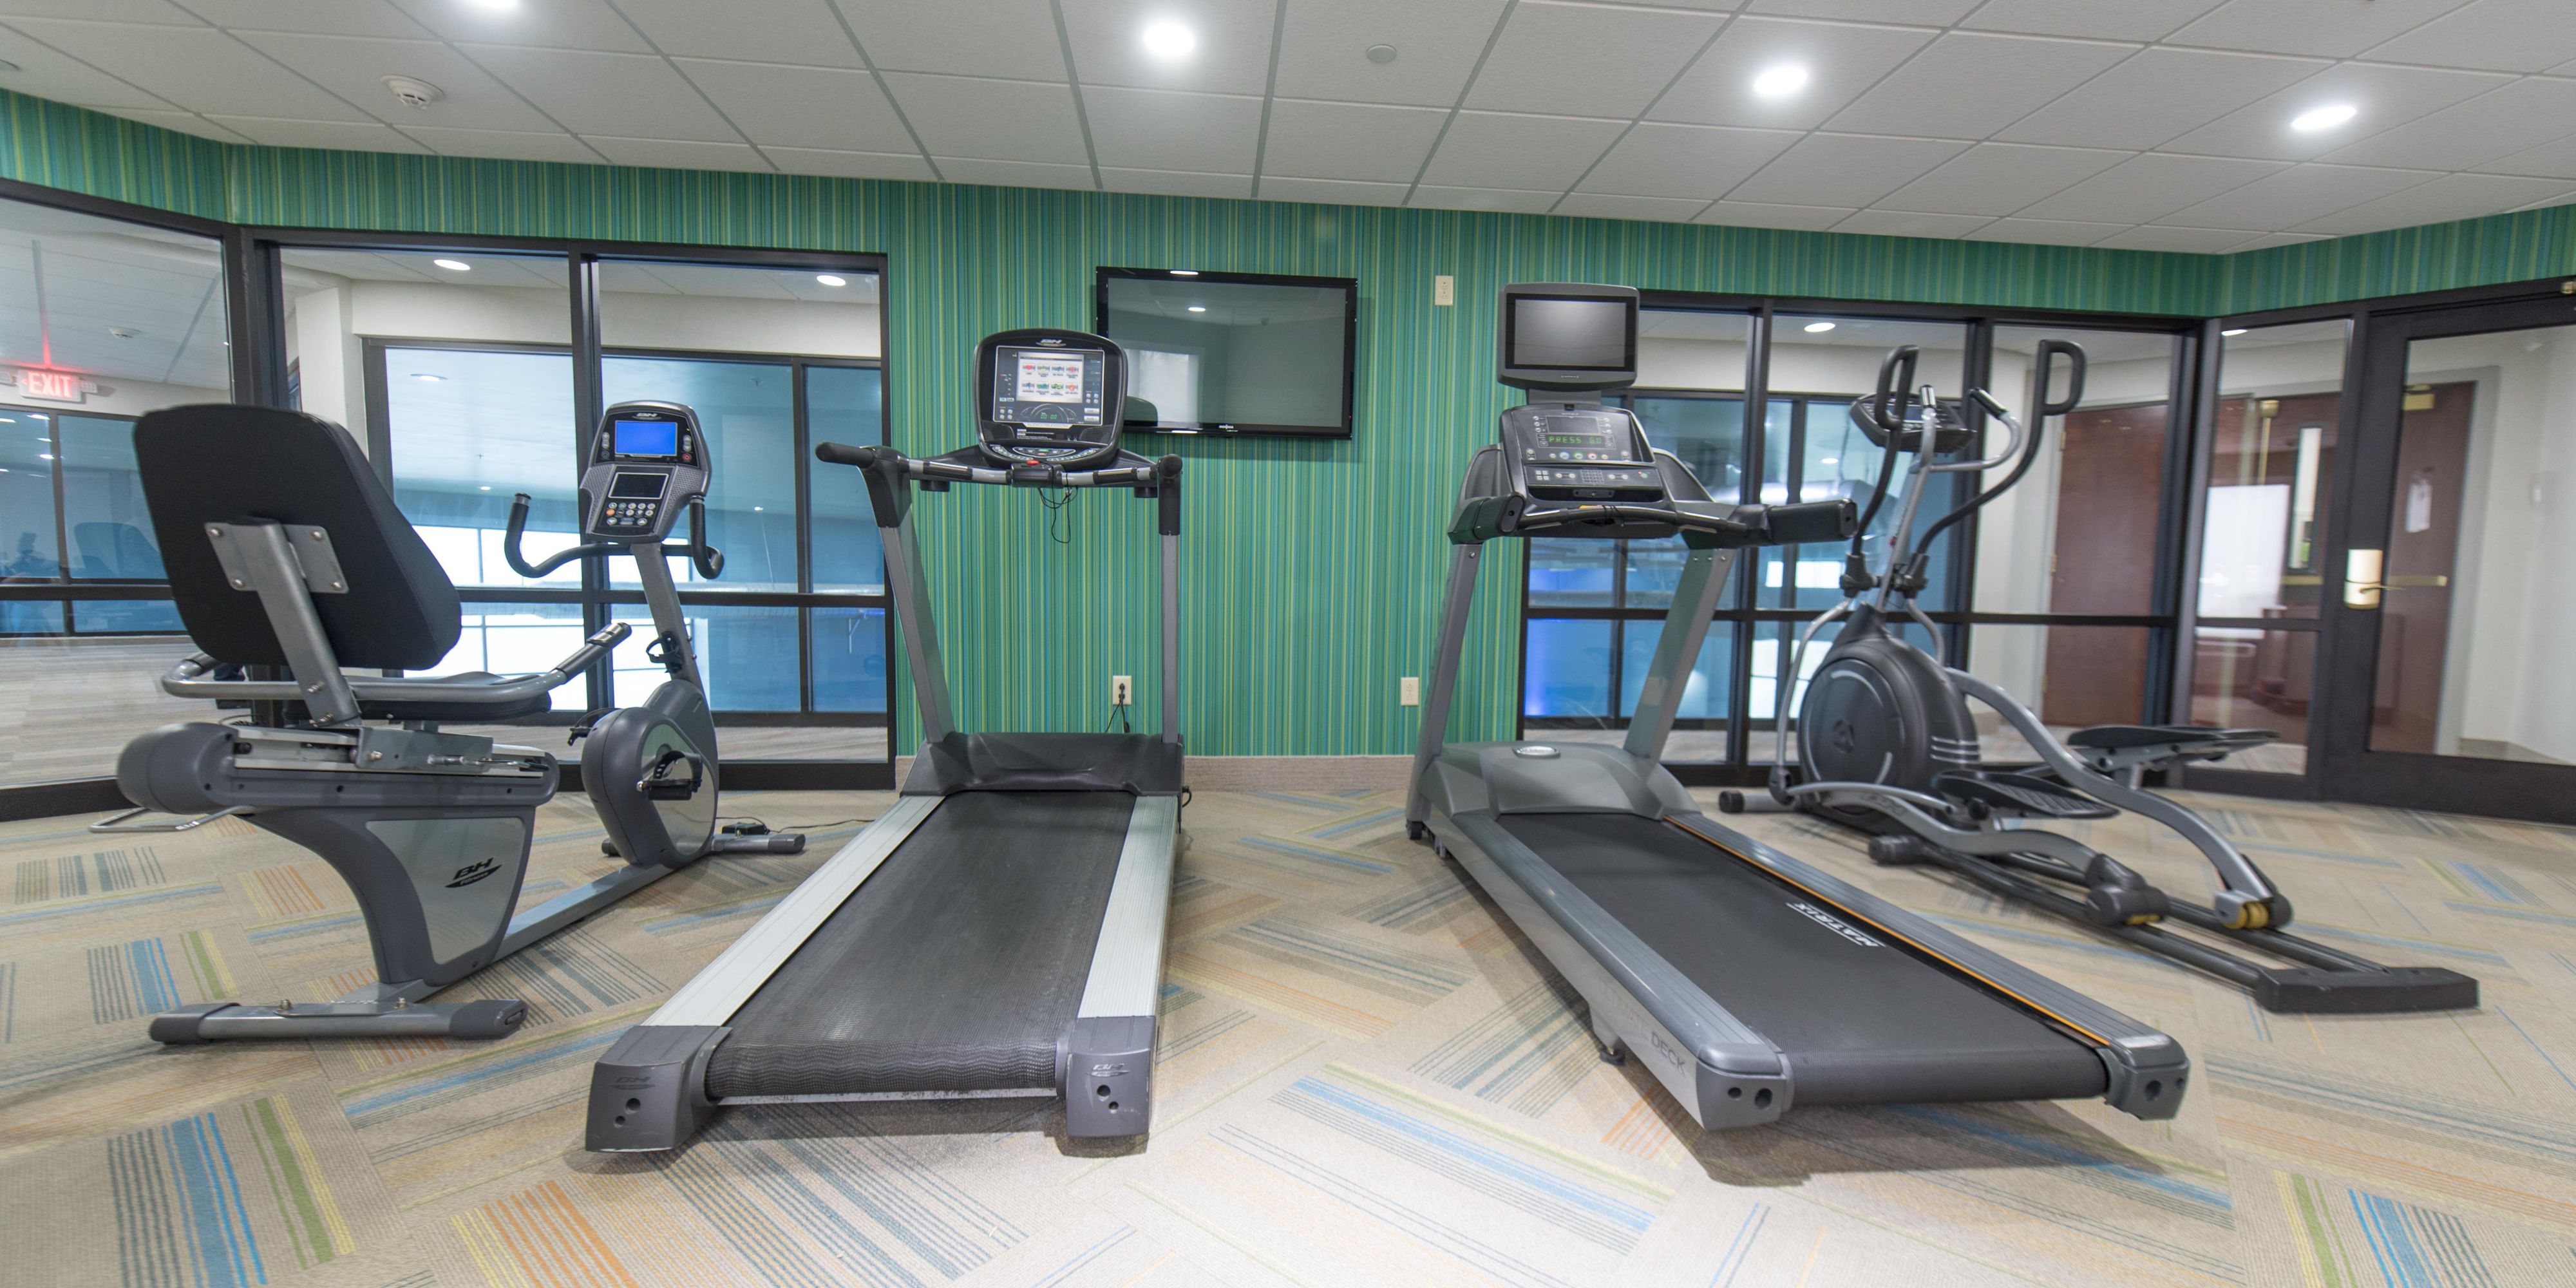 Keep your mind and body healthy with our complimentary fitness center. No need to stop your exercise program because your traveling. Our on site fitness room offers free weights, elliptical machines, treadmill and yoga essentials. Hours of operation is from 6:00am to 10:00pm